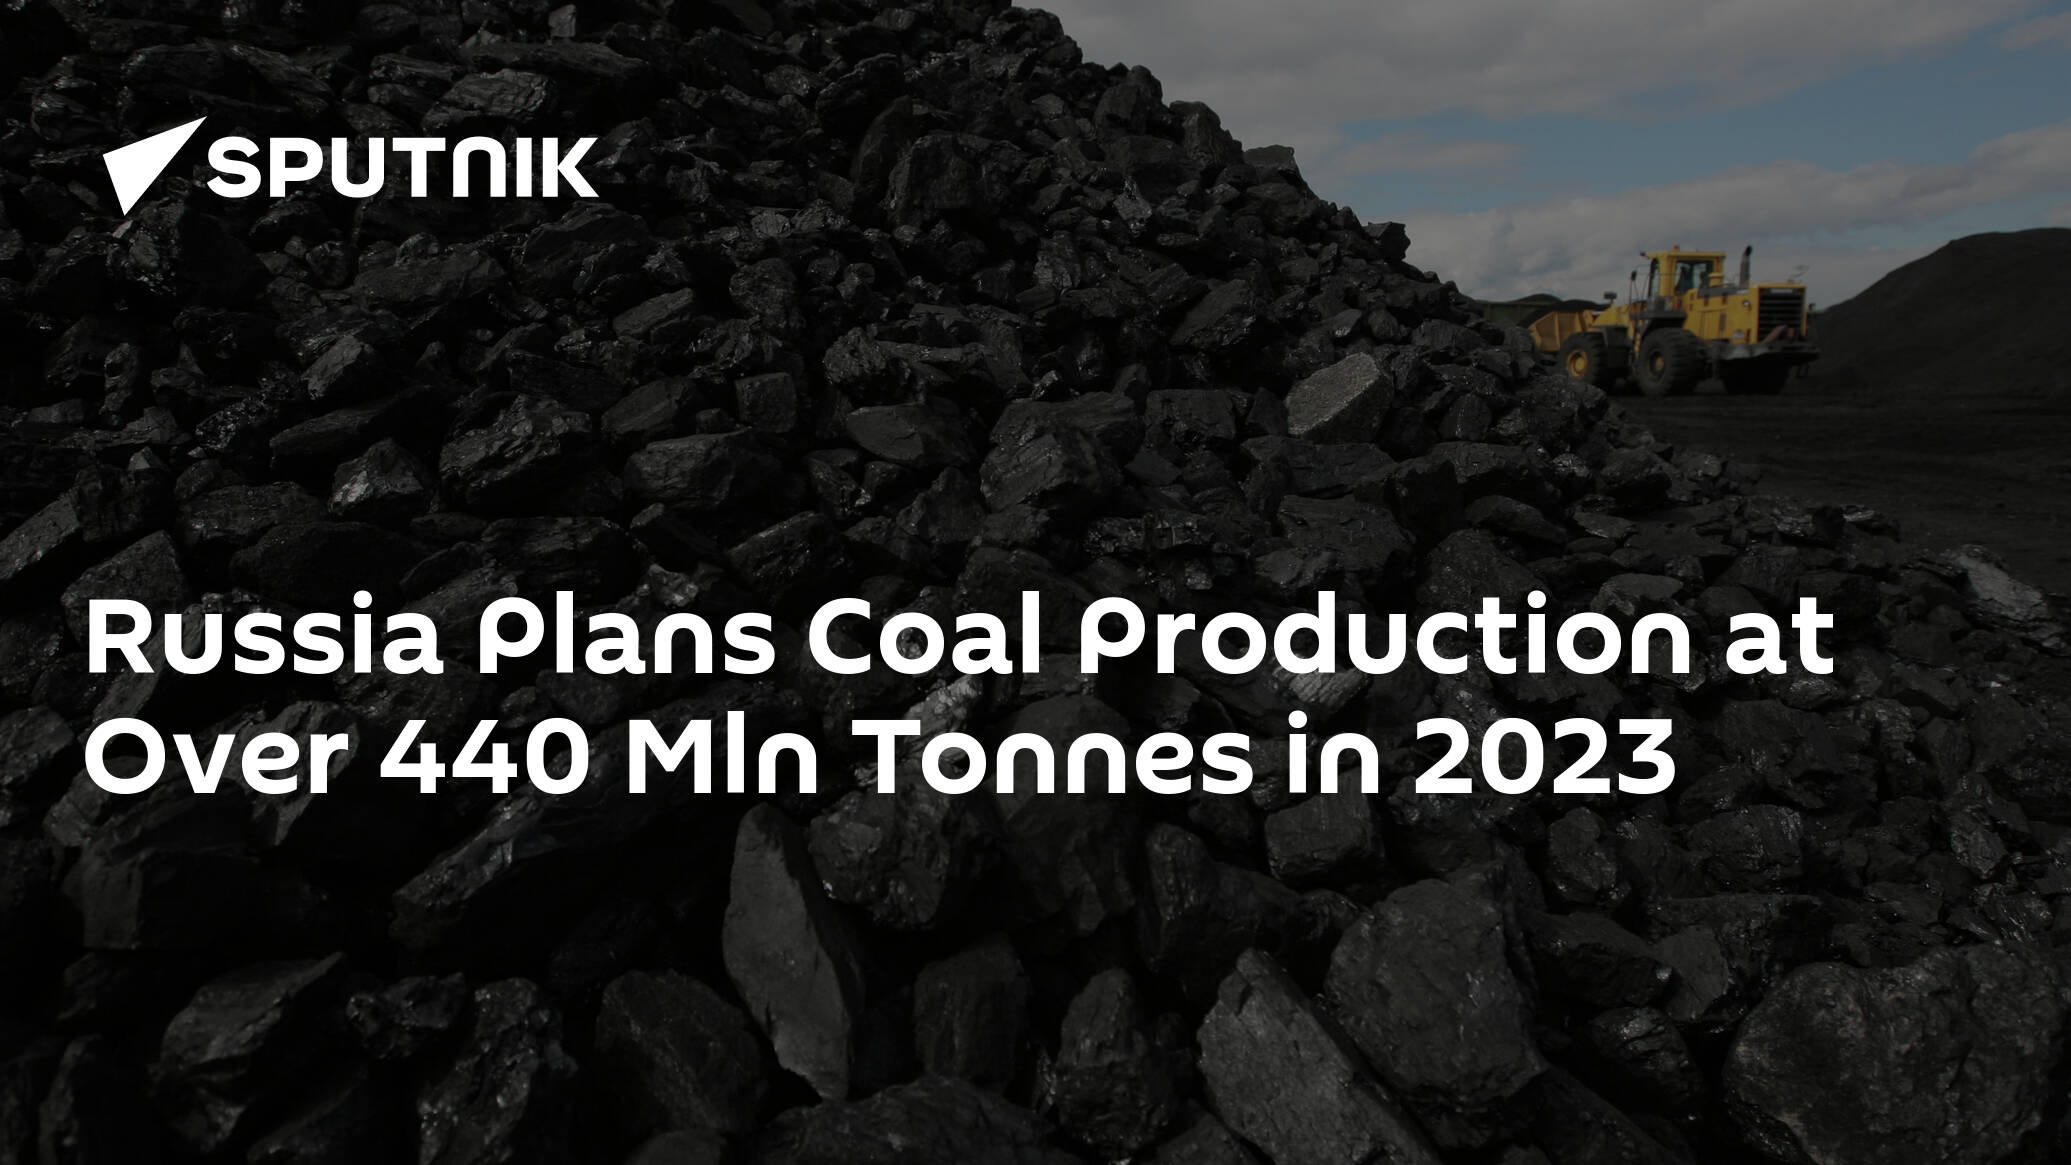 Russia Plans Coal Production at Over 440 Mln Tonnes in 2023